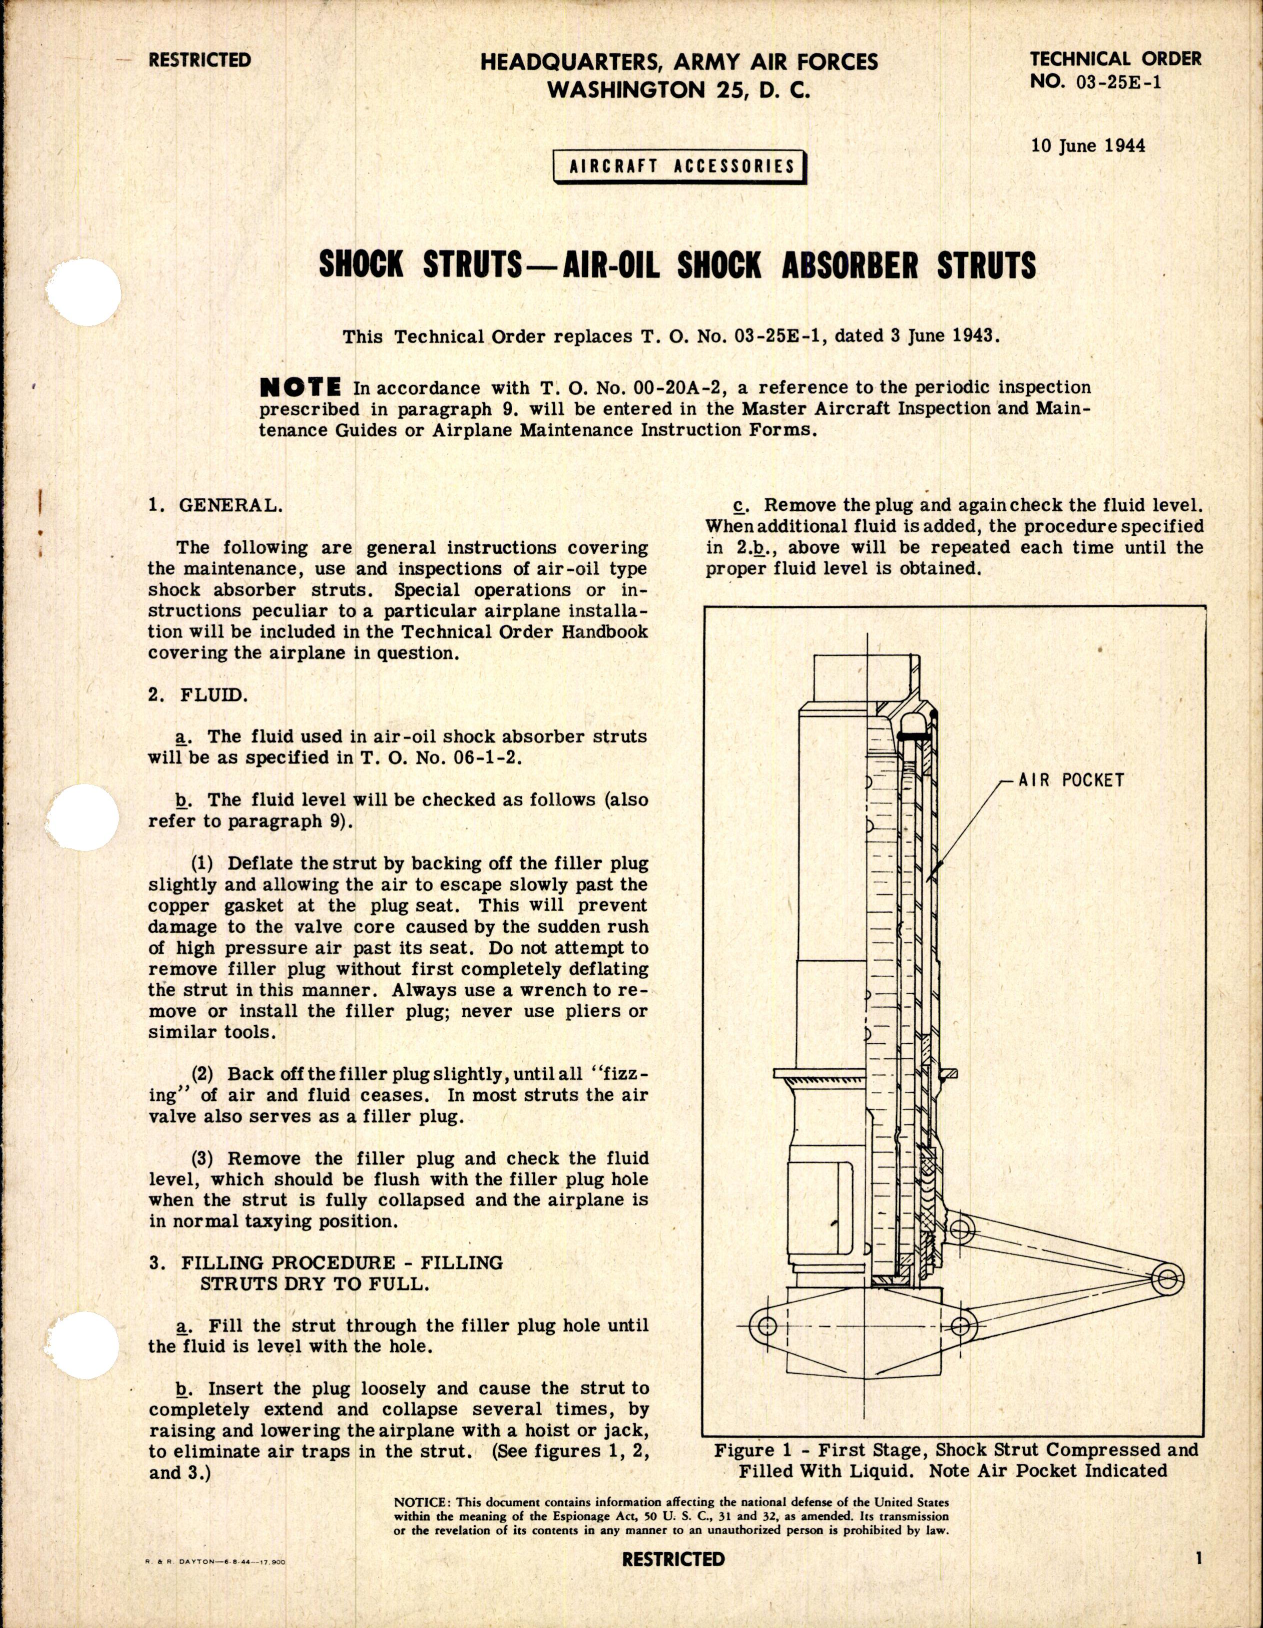 Sample page 1 from AirCorps Library document: Shock Struts - Air-Oil Shock Absorber Struts